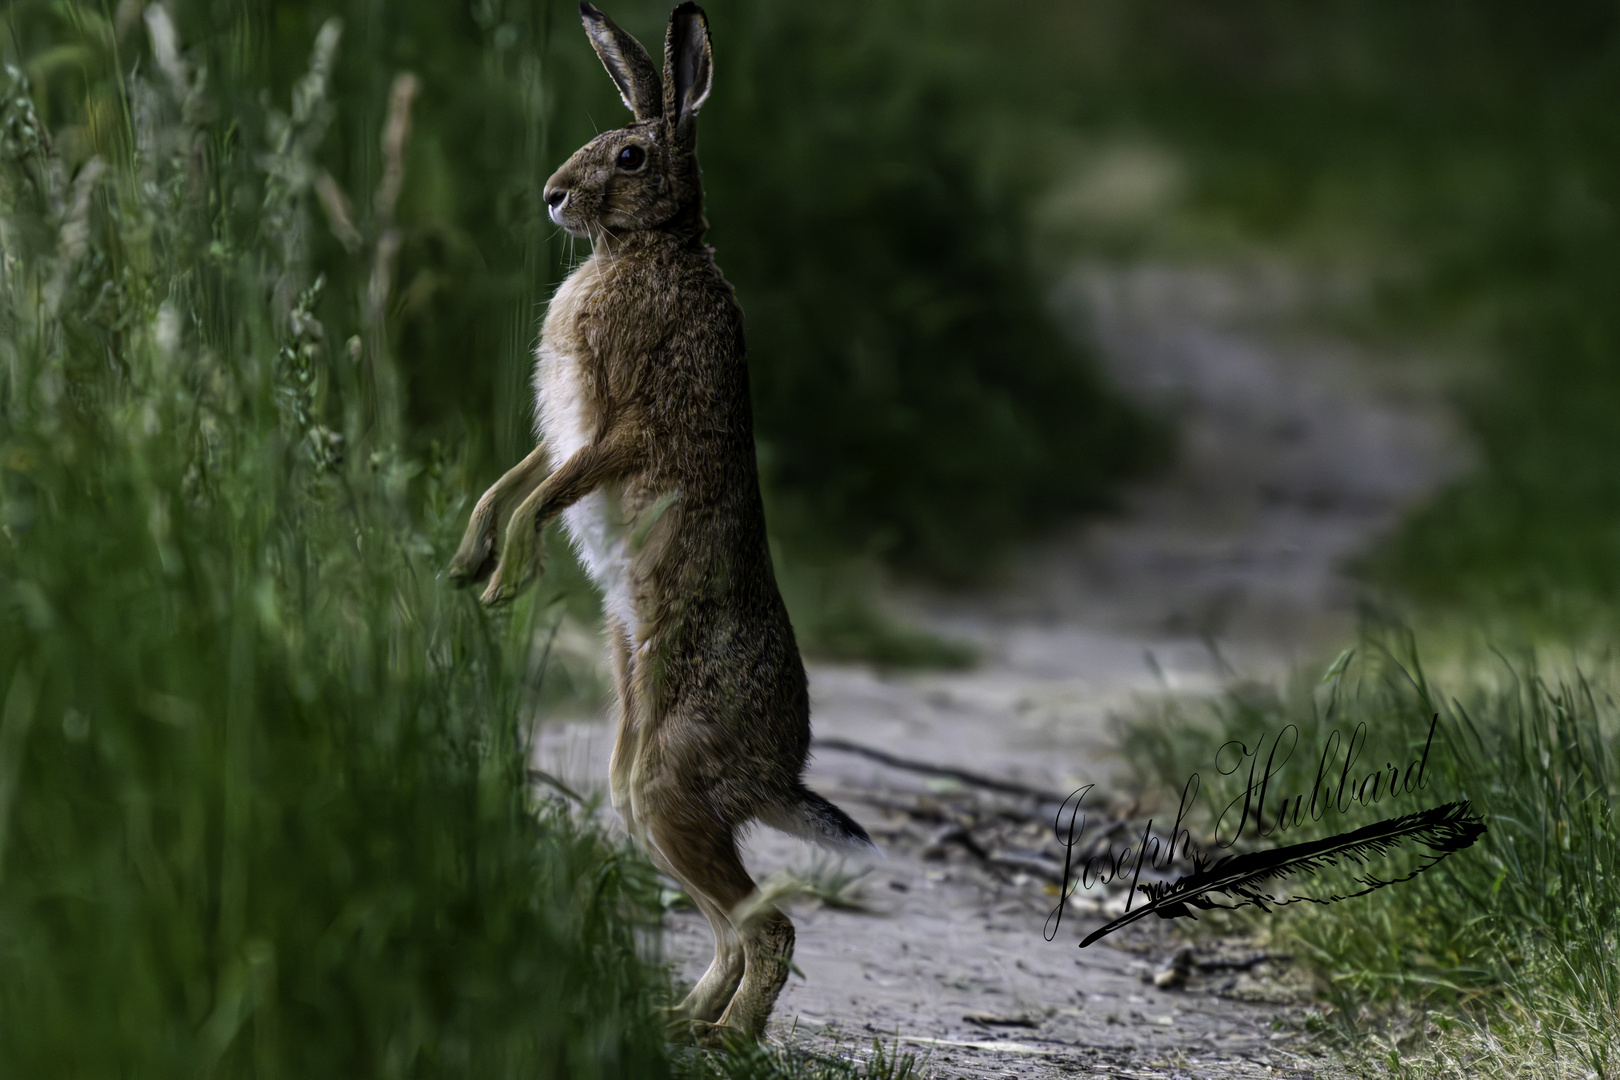 The European hare up and walking